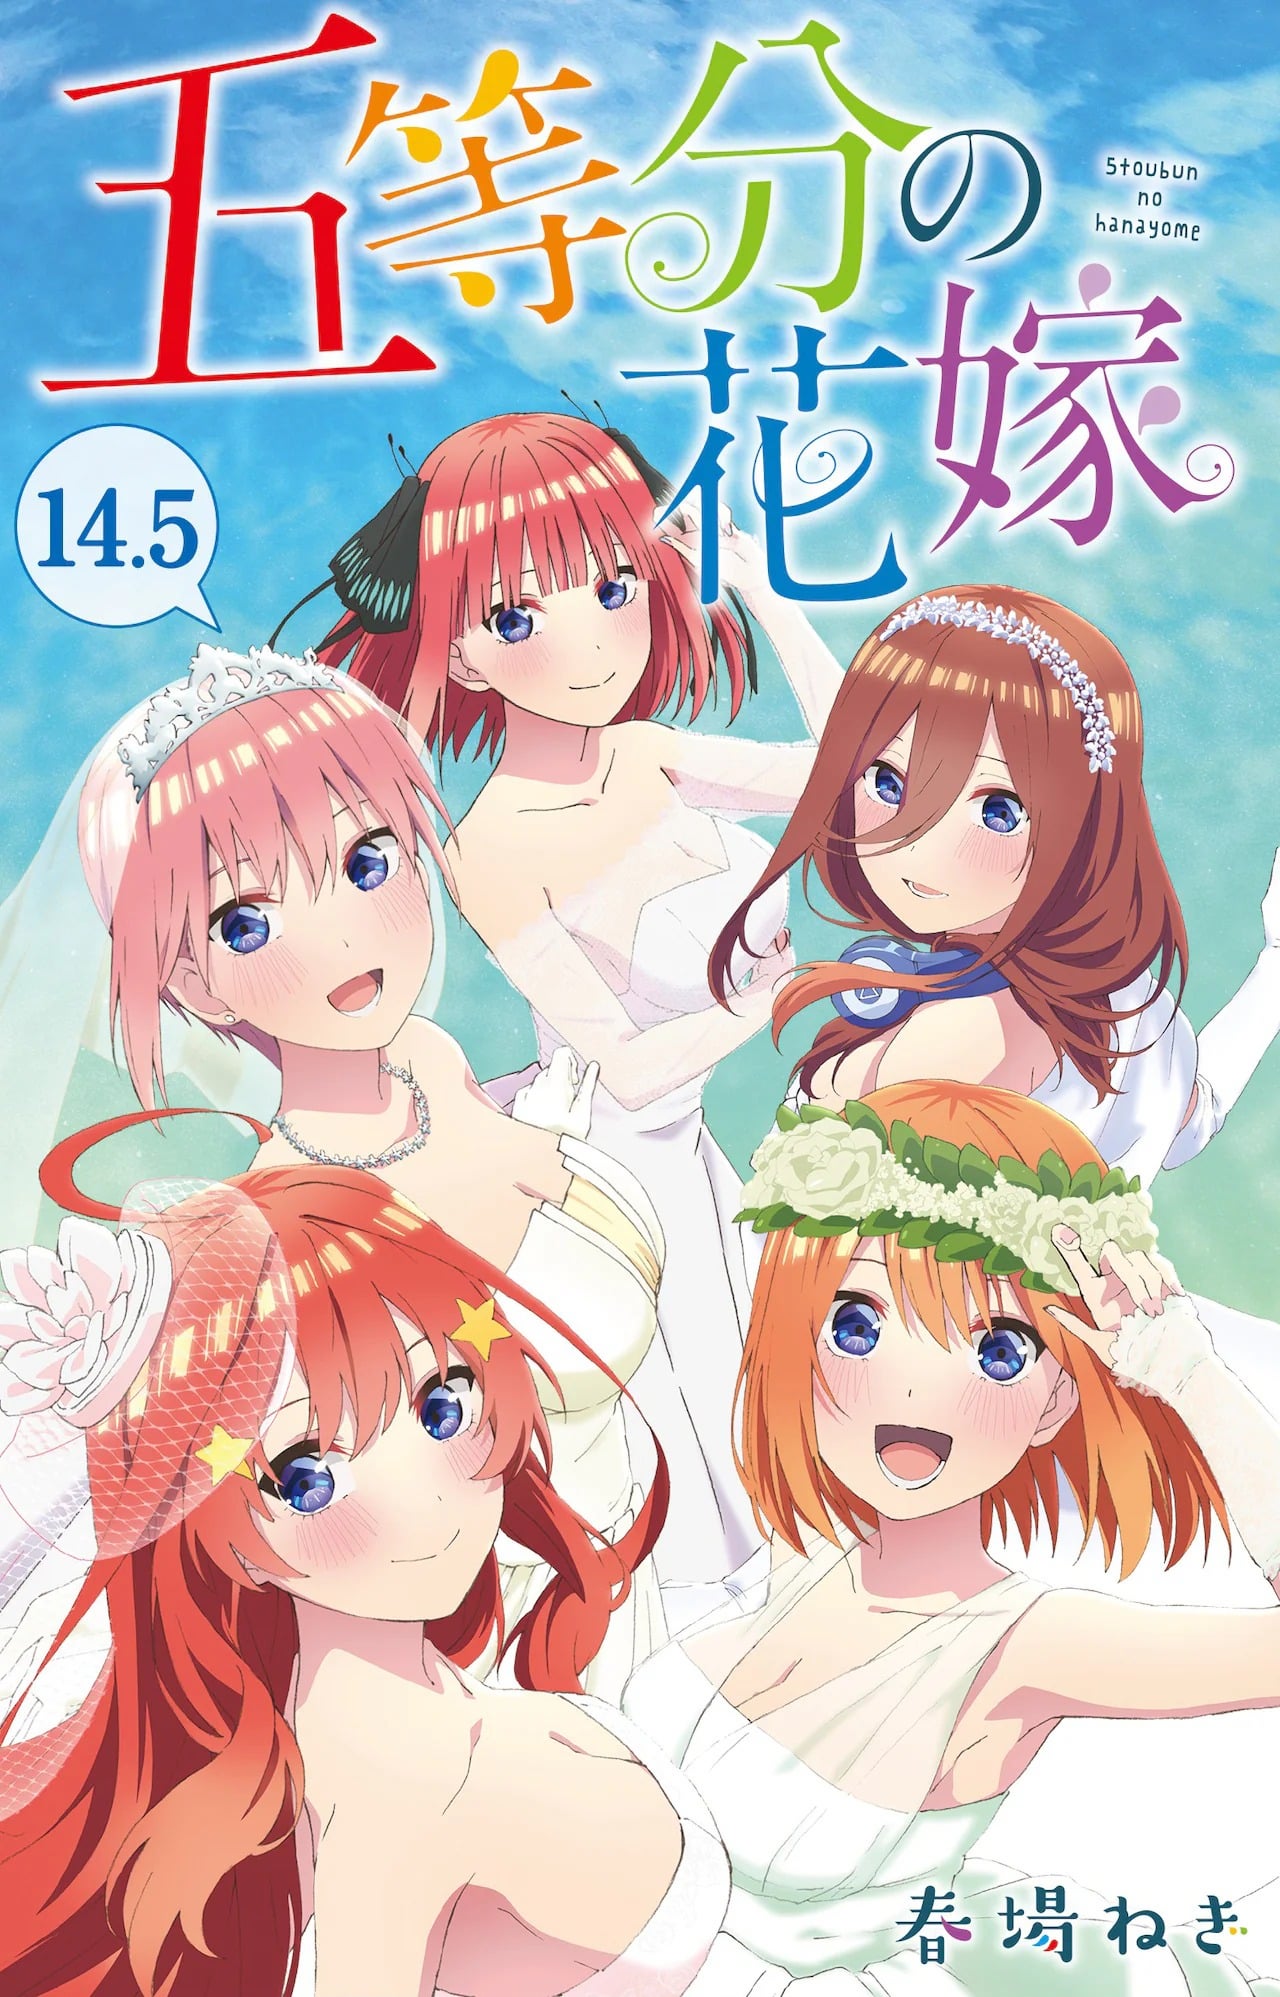 ART] Someone at MangaDex clearly knows who the best quintuplet is (5Toubun  no Hanayome) : r/manga